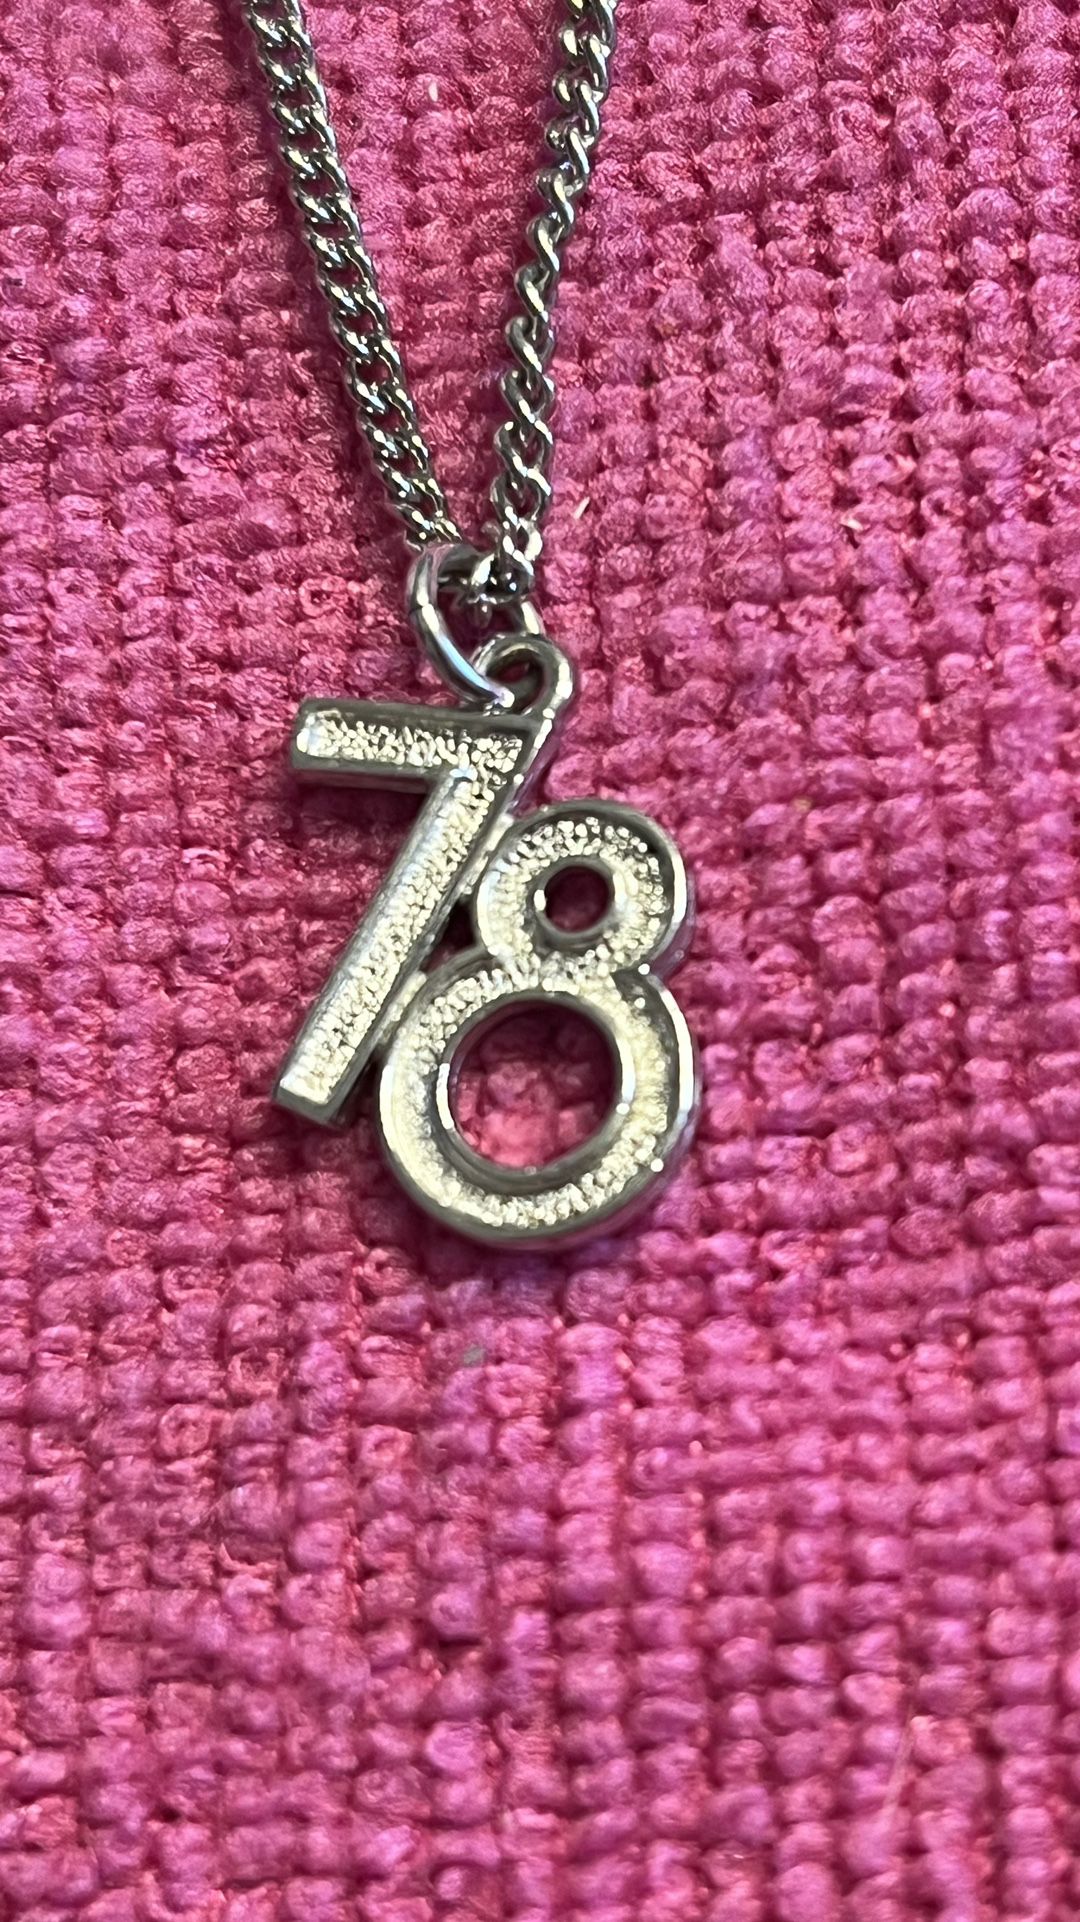 Vintage 1978 Avon Necklace 78 pendant charm number birthday year jersey silver tone,new Never Been Used 